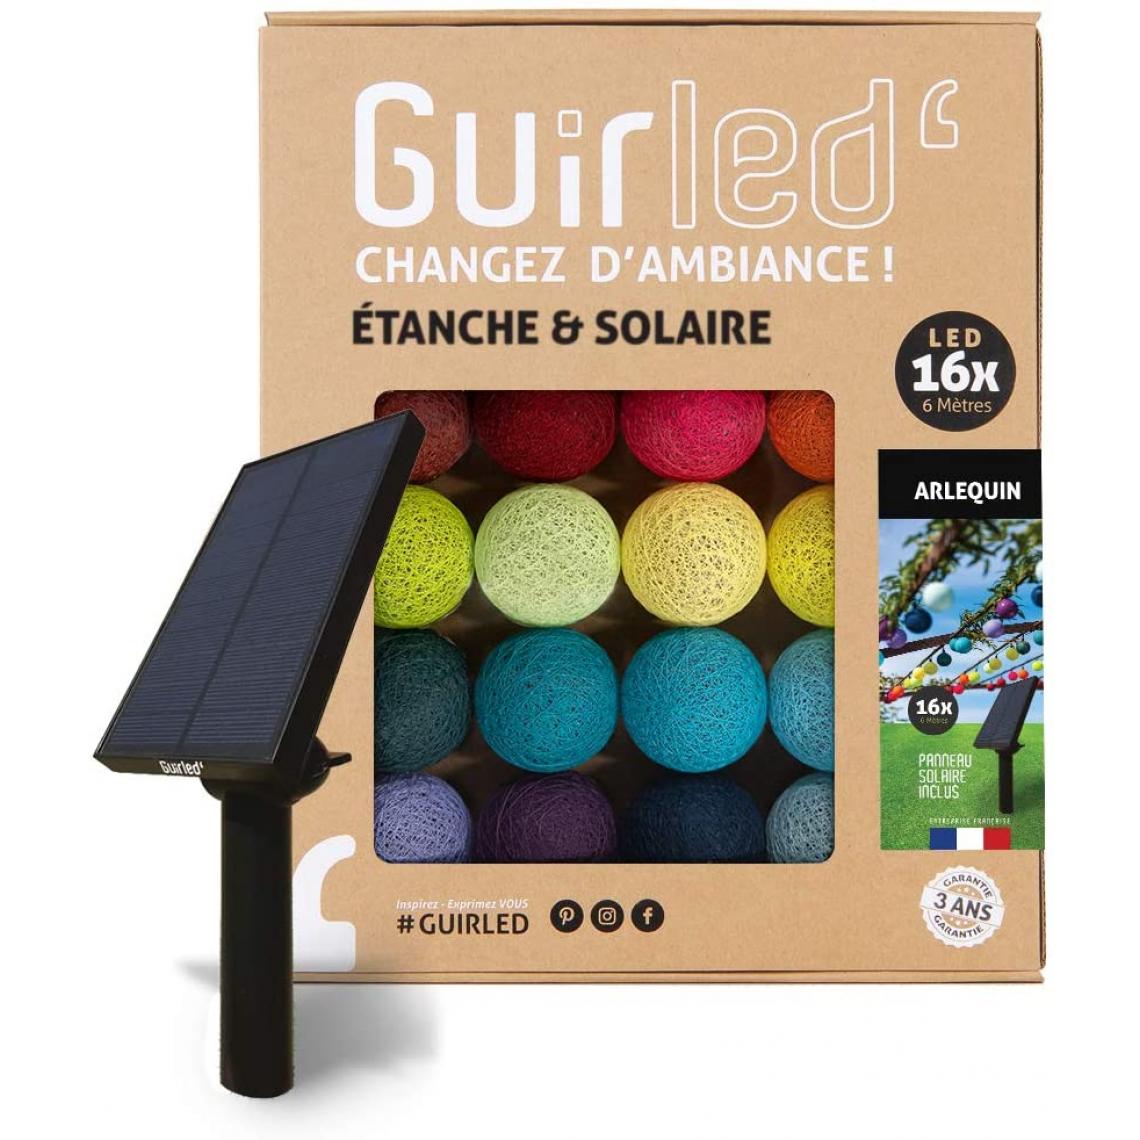 Guirled - Guirlande boule lumineuse 16 LED Outdoor - Arlequin - Eclairage solaire